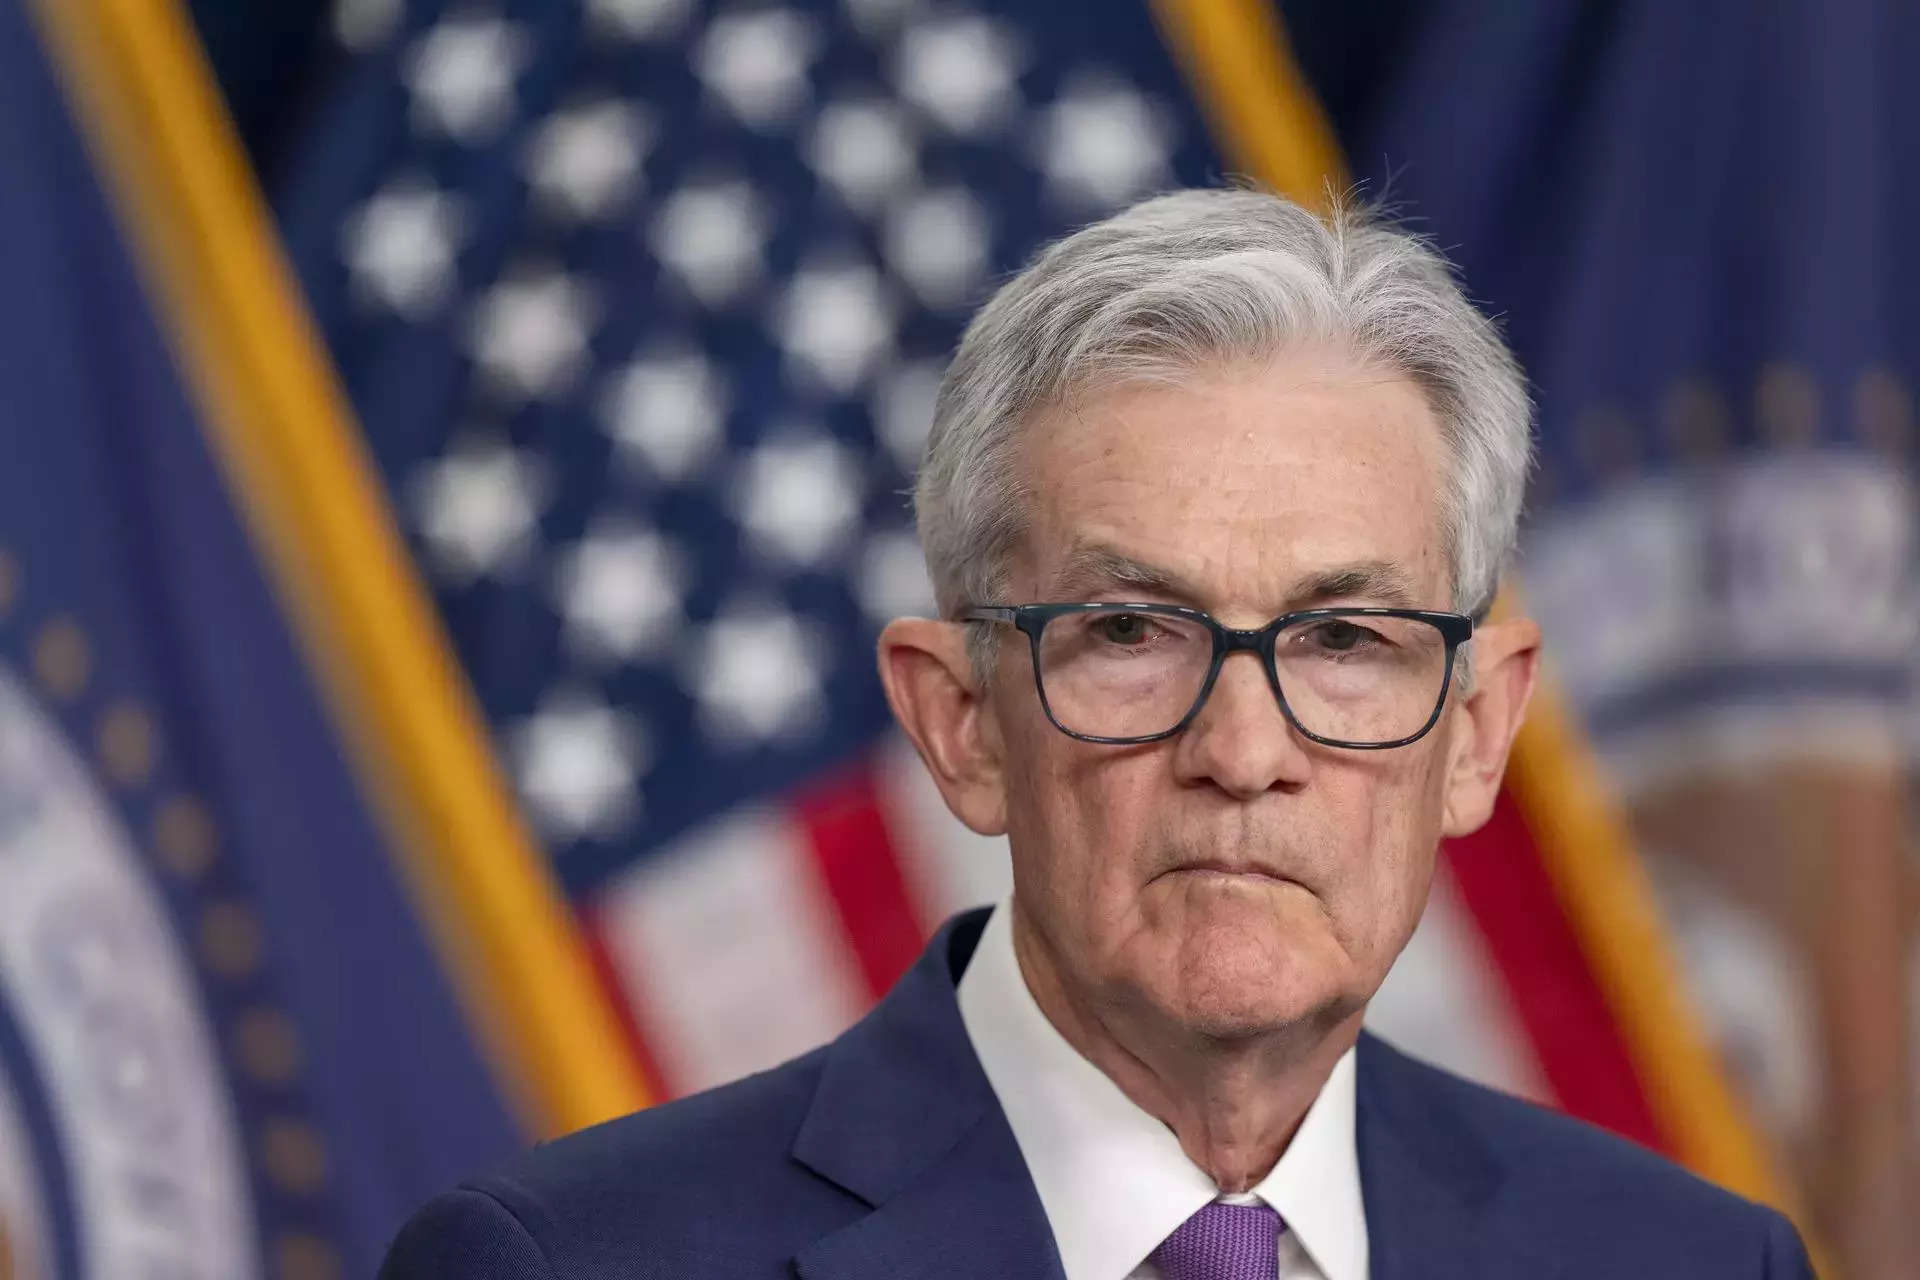 Powell: Need more faith on inflation to cut rates